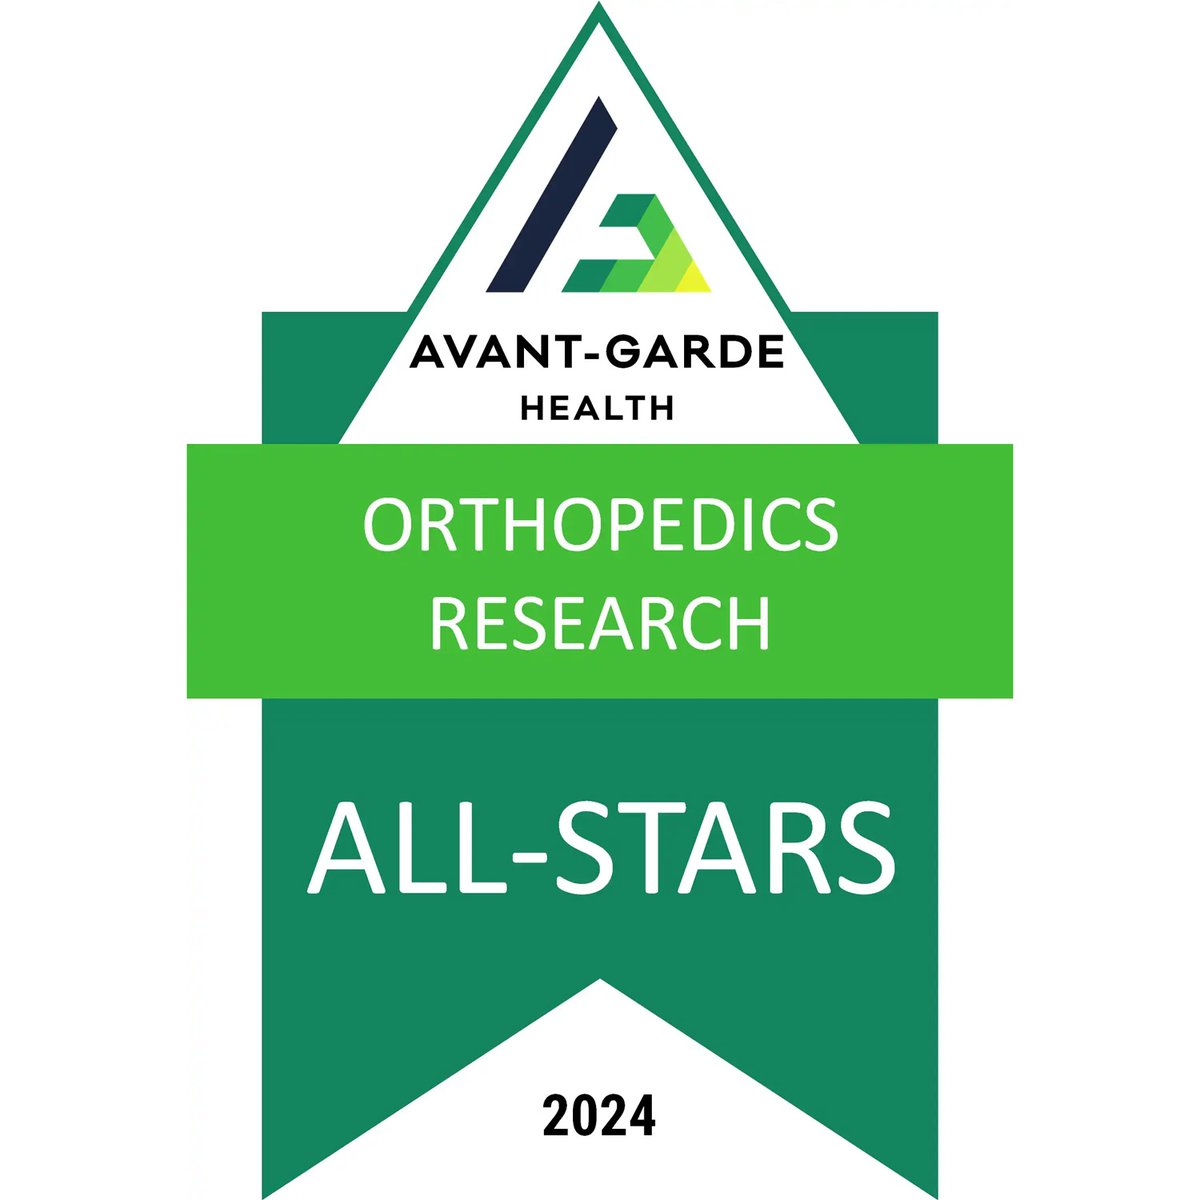 I'm honored to share my team's recognition as a 2024 Orthopedic Surgery Research All-Star! The list features only the top 1% of surgeons whose research defines the forefront of Orthopedic Surgery care.

#HealthcareResearchAllStars #orthopedicsurgery #healthcare #avantgardehealth